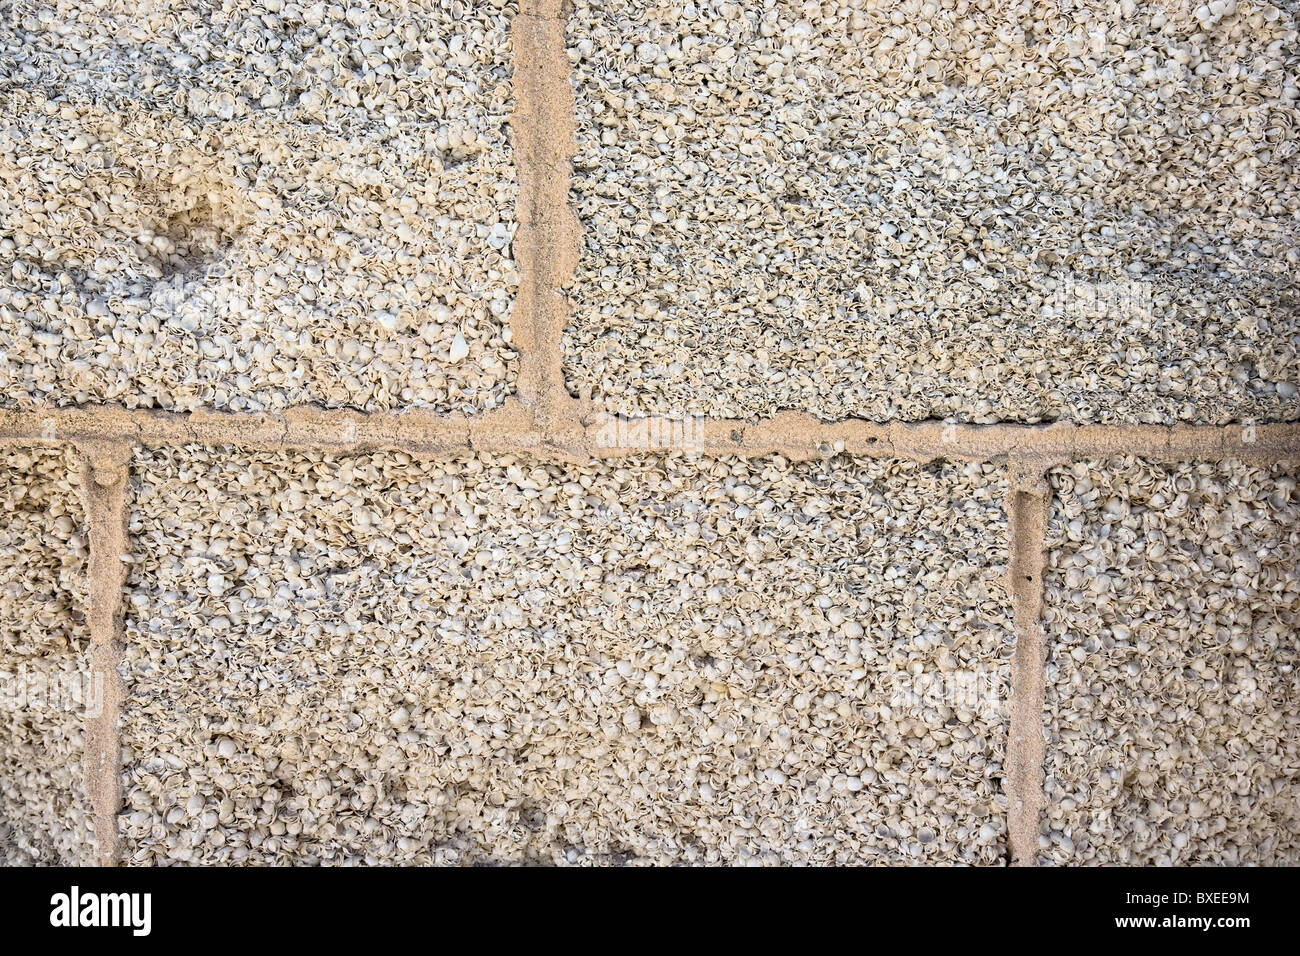 Detail of wall built from shell blocks of  a compacted mass of white bivalves called Hamelin cockle at Hamelin Pool W Australia Stock Photo